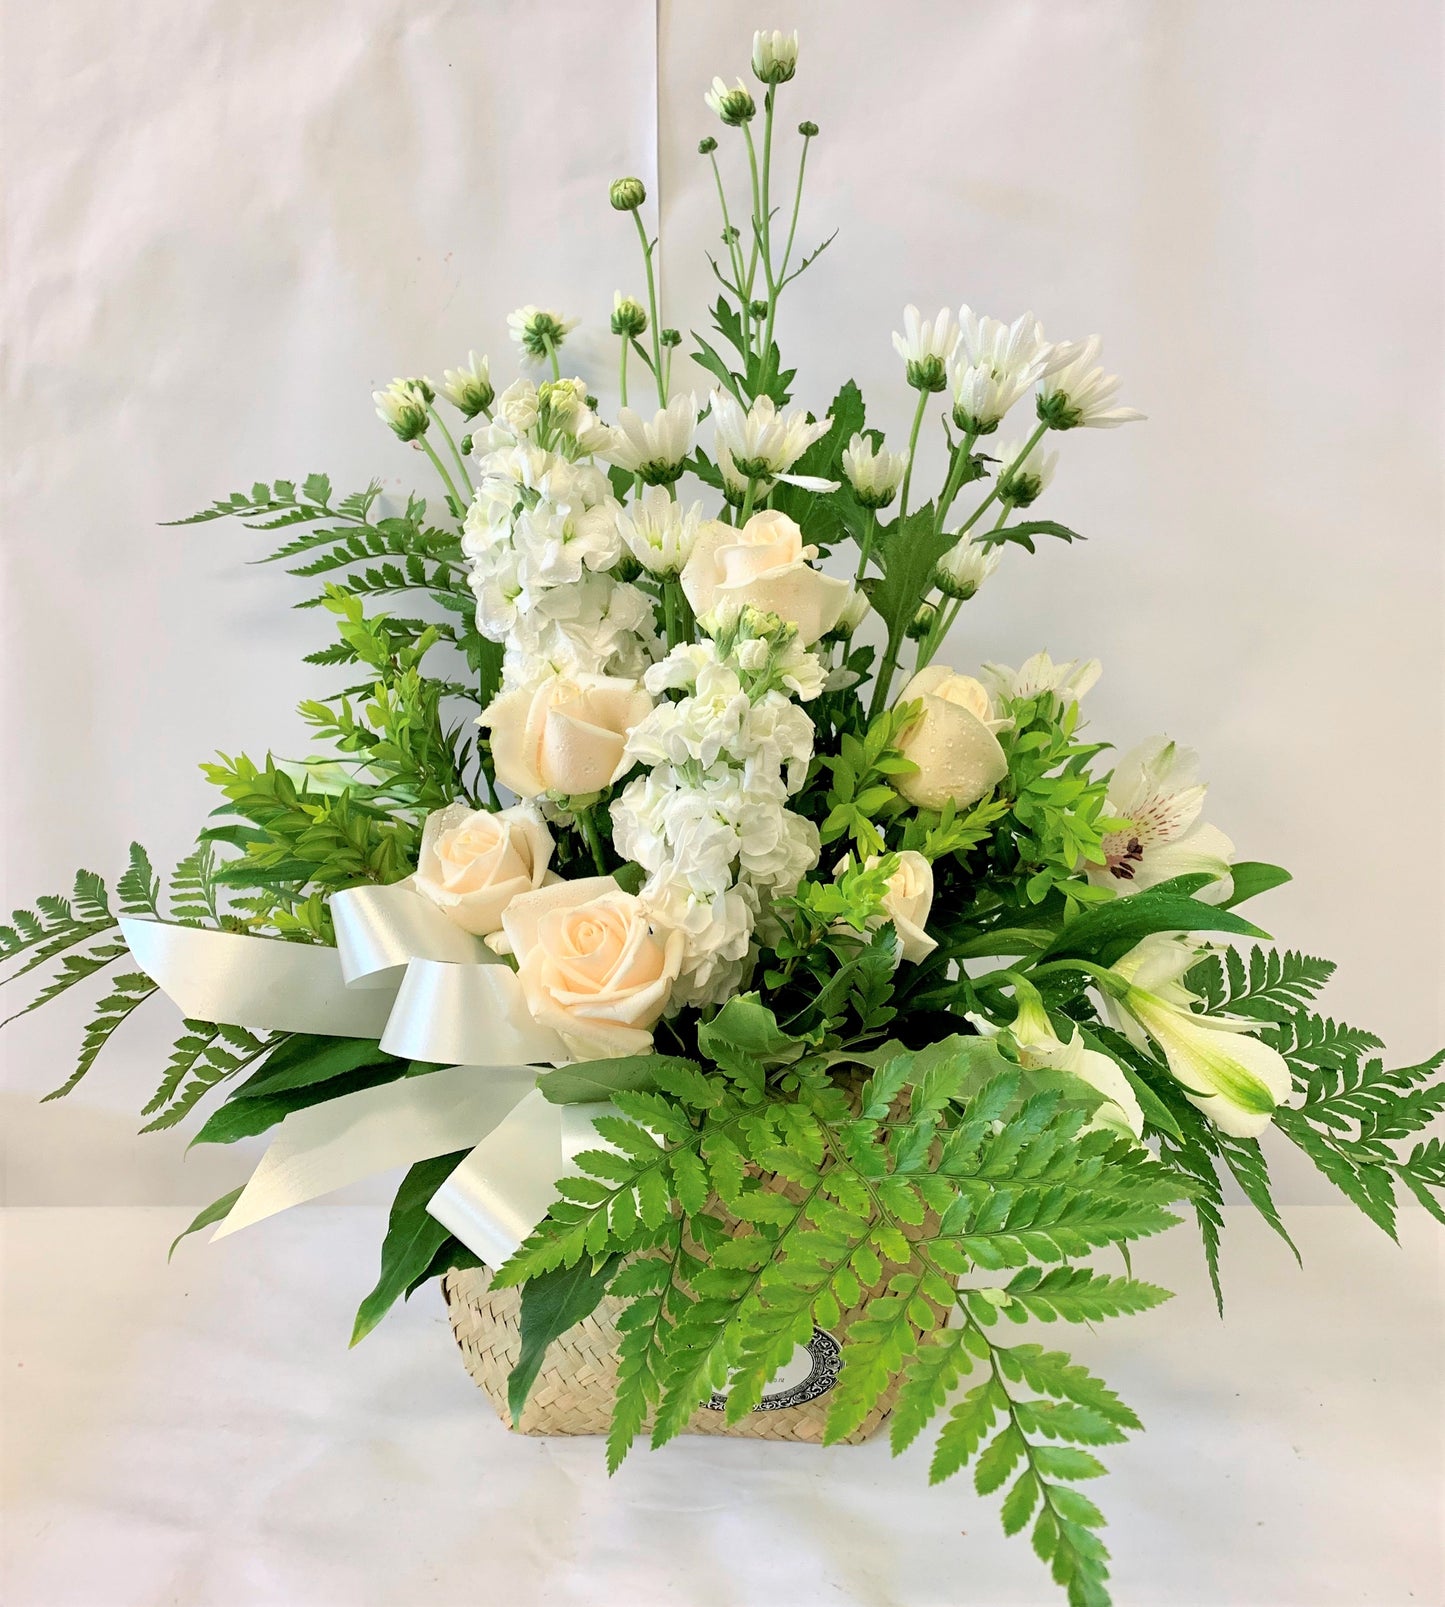 Sympathy flowers with native ferns and stock roses, whanua gift or sympathy gift